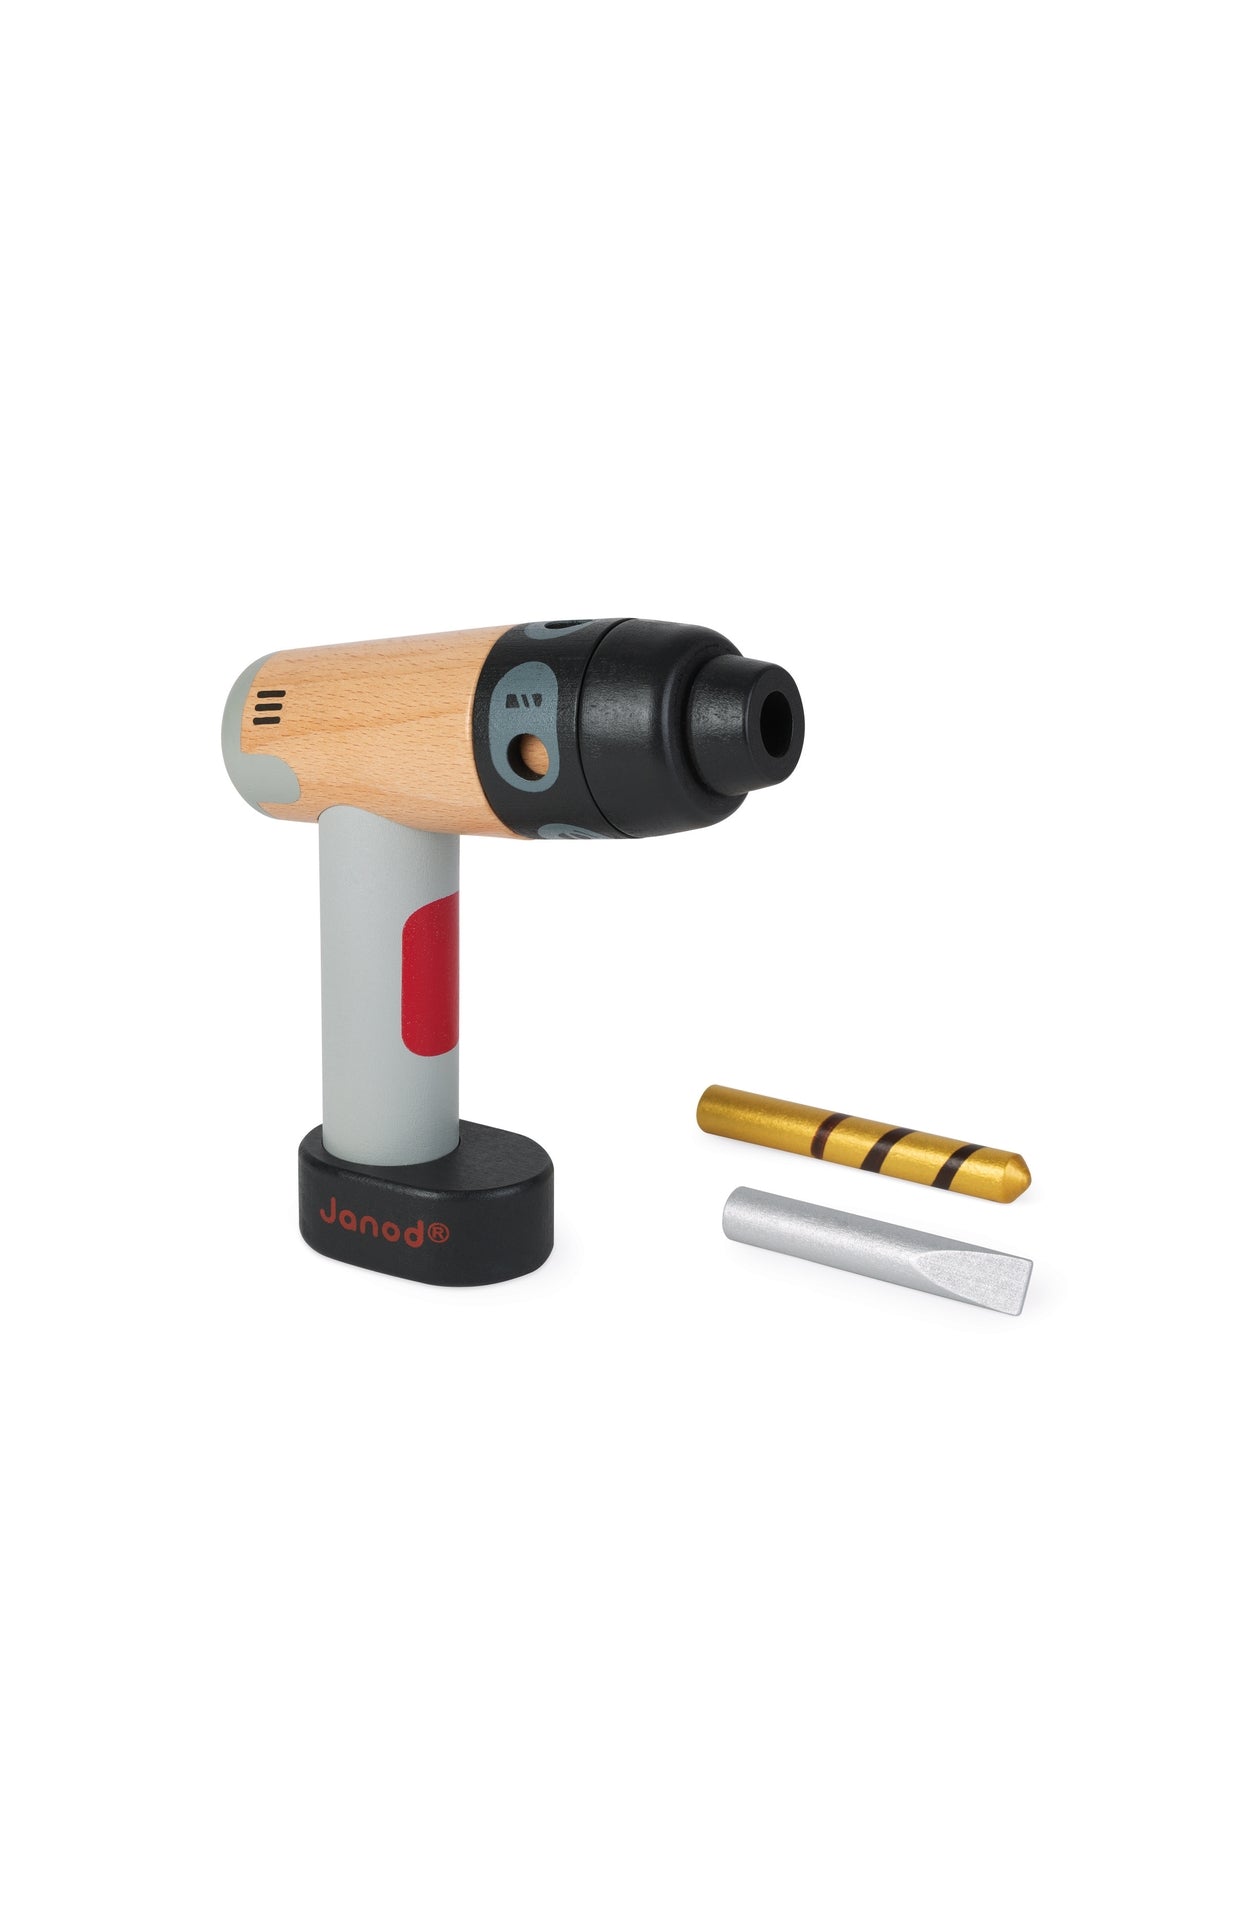 janod bricos kids / This wooden toy drill has everything you would expect from a real grown-ups’ drill!  Includes 2 magnetic tools for screwing, unscrewing and drilling holes. The middle part of the drill can be rotated (manually) to choose the type of hole you need. 